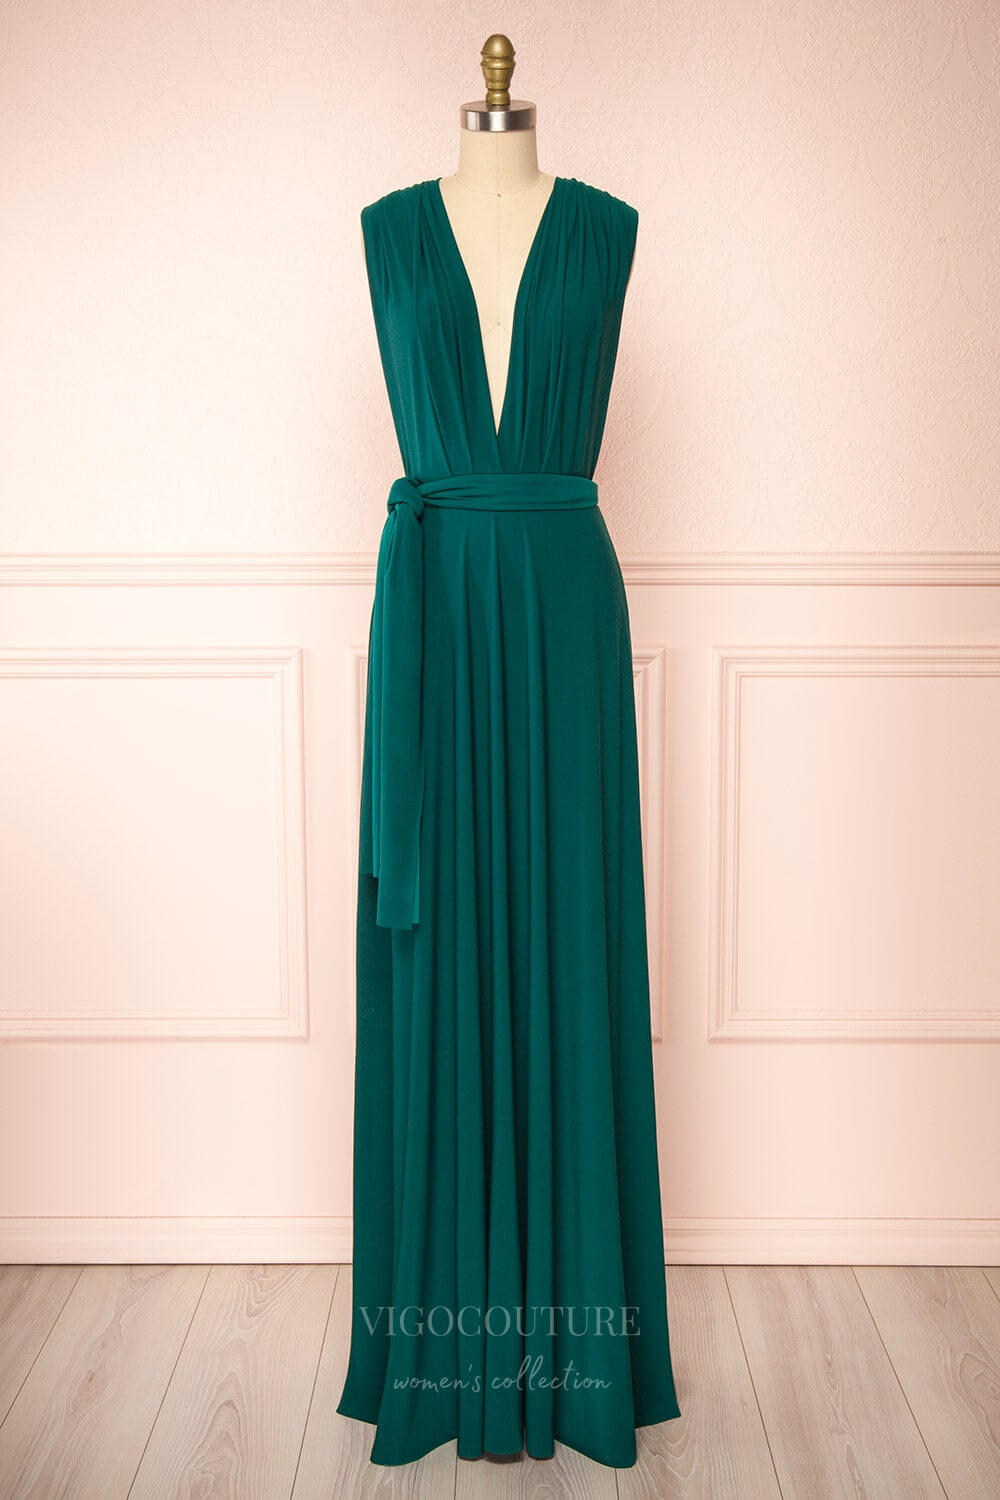 vigocouture-Convertible Bridesmaid Dress Stretchable Woven Dress Pleated Prom Dress Multiway Dress 20860-Prom Dresses-vigocouture-Green-US2-